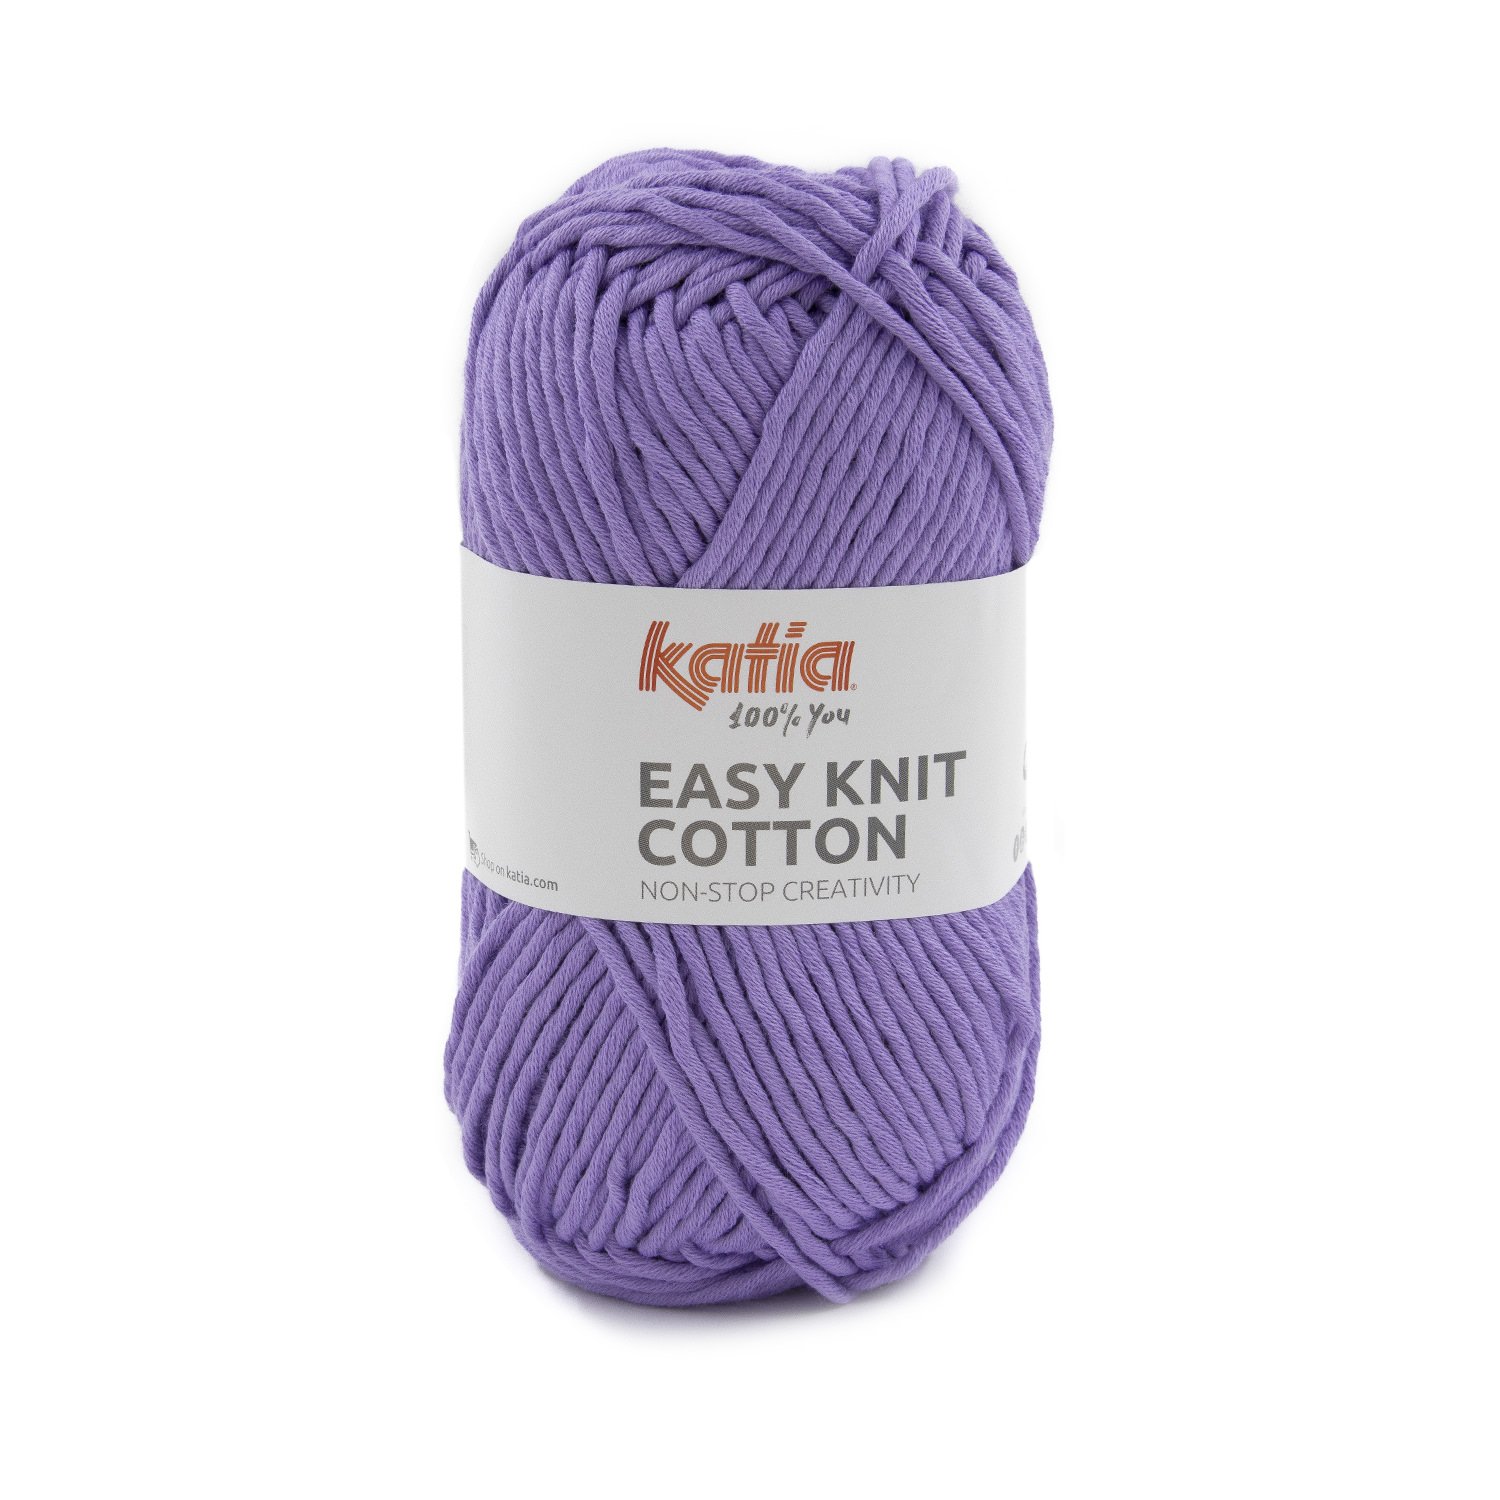 Easy Knit Cotton